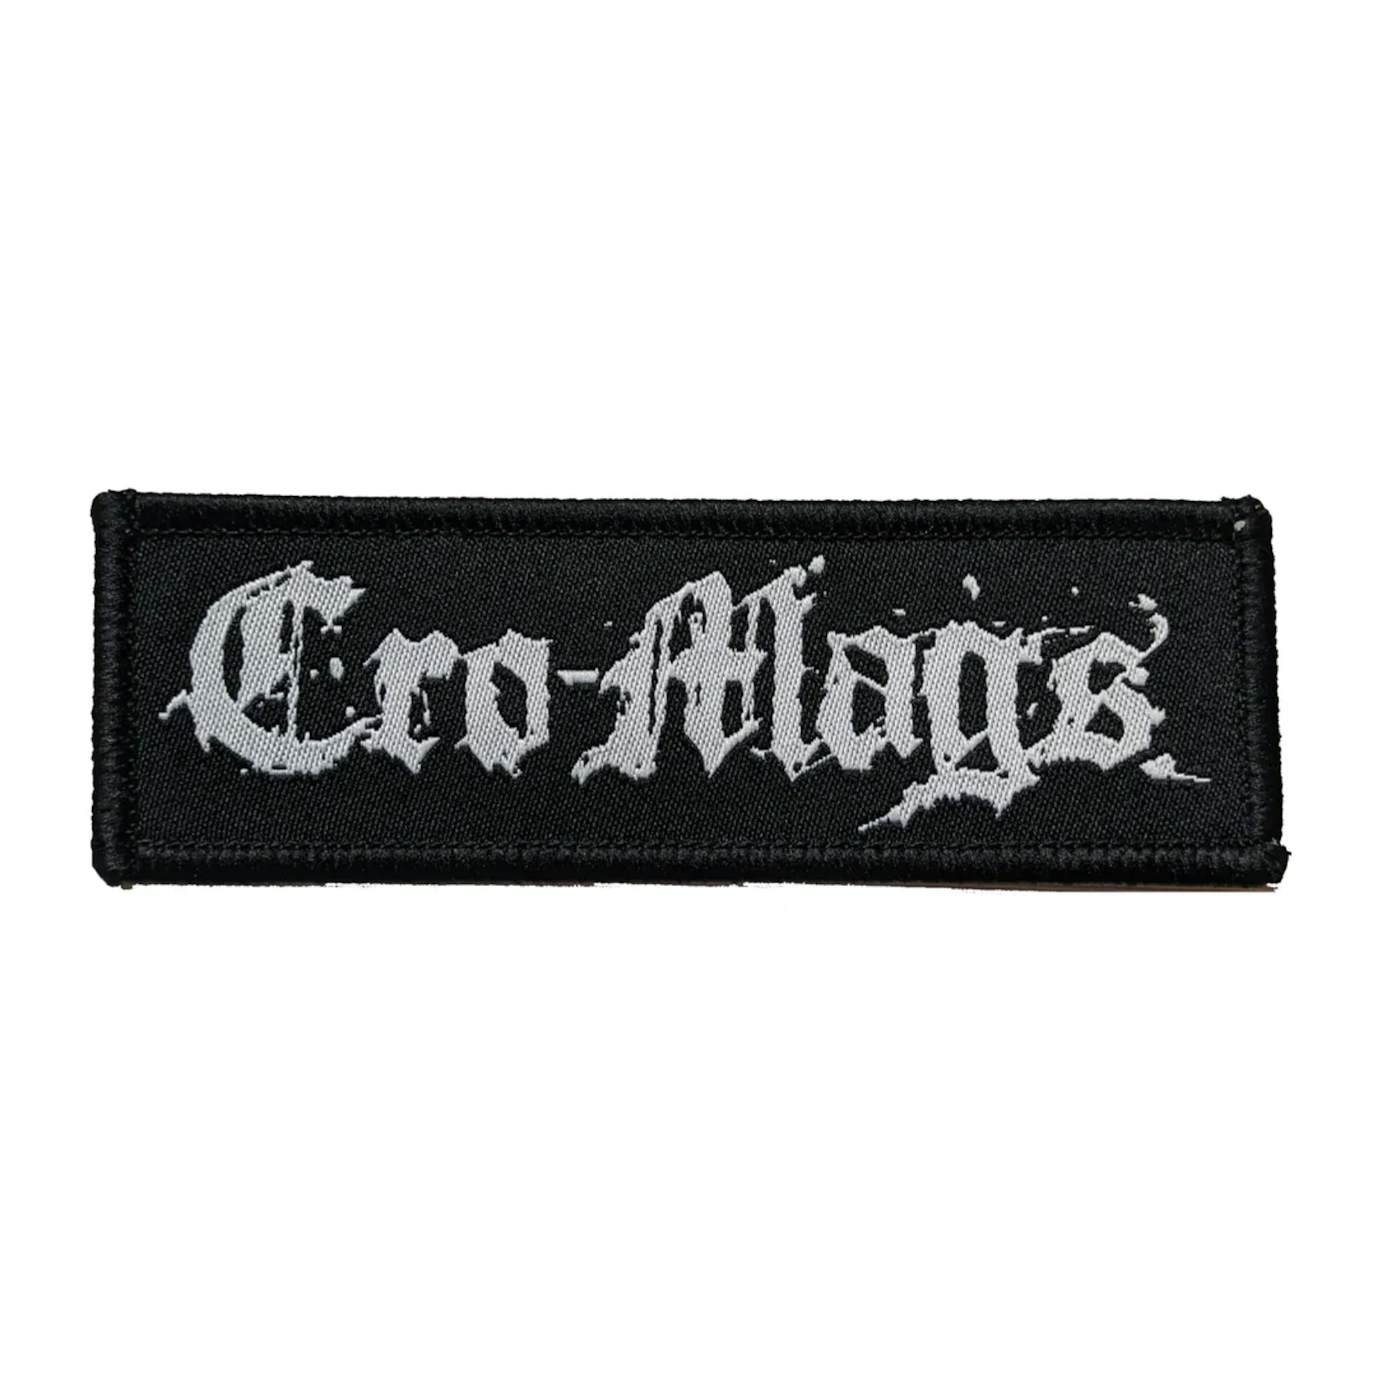 Cro-Mags "Logo" Patch